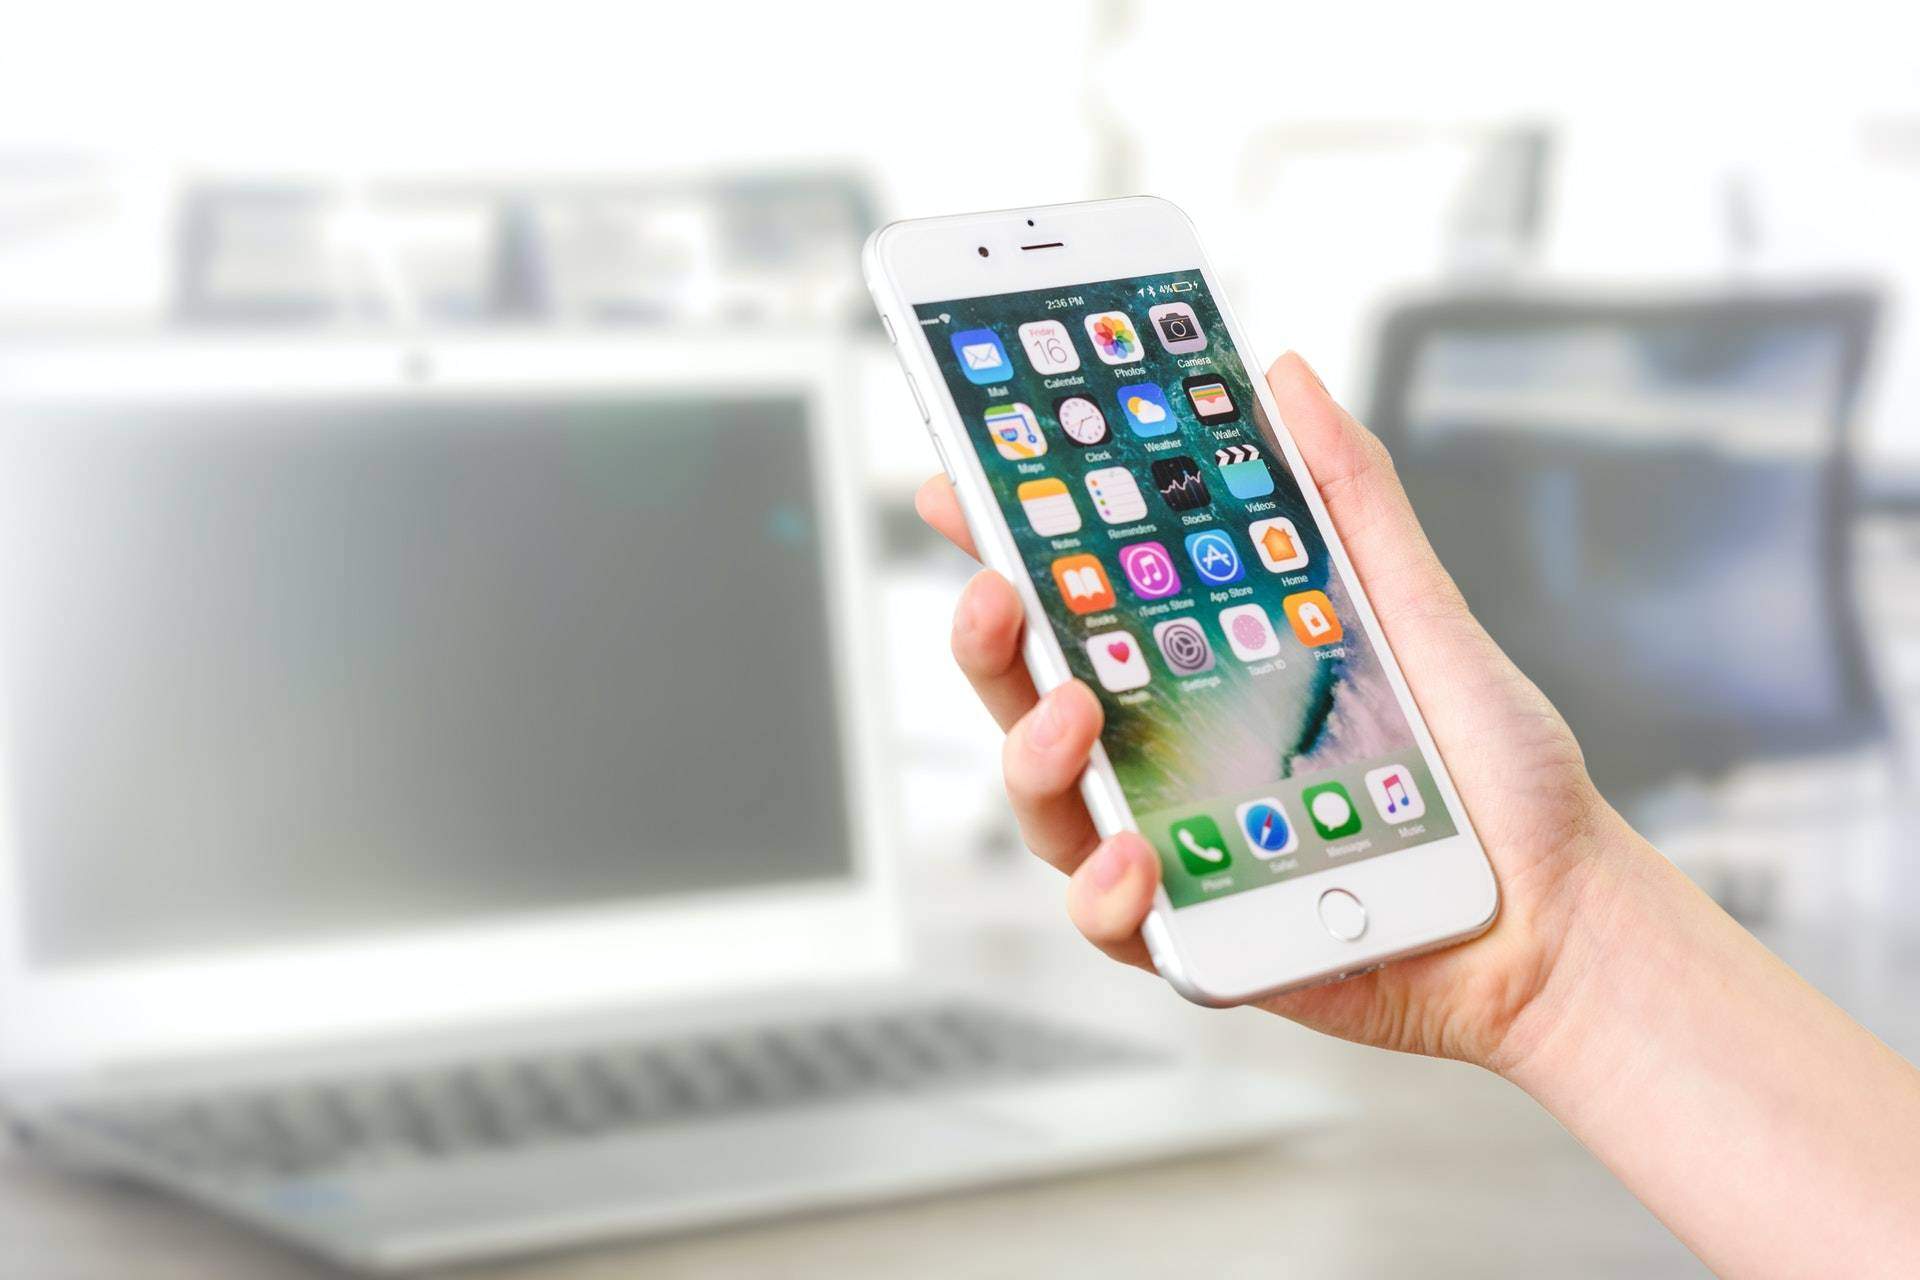 Mobile Application Development Is One Of The Most Important Things